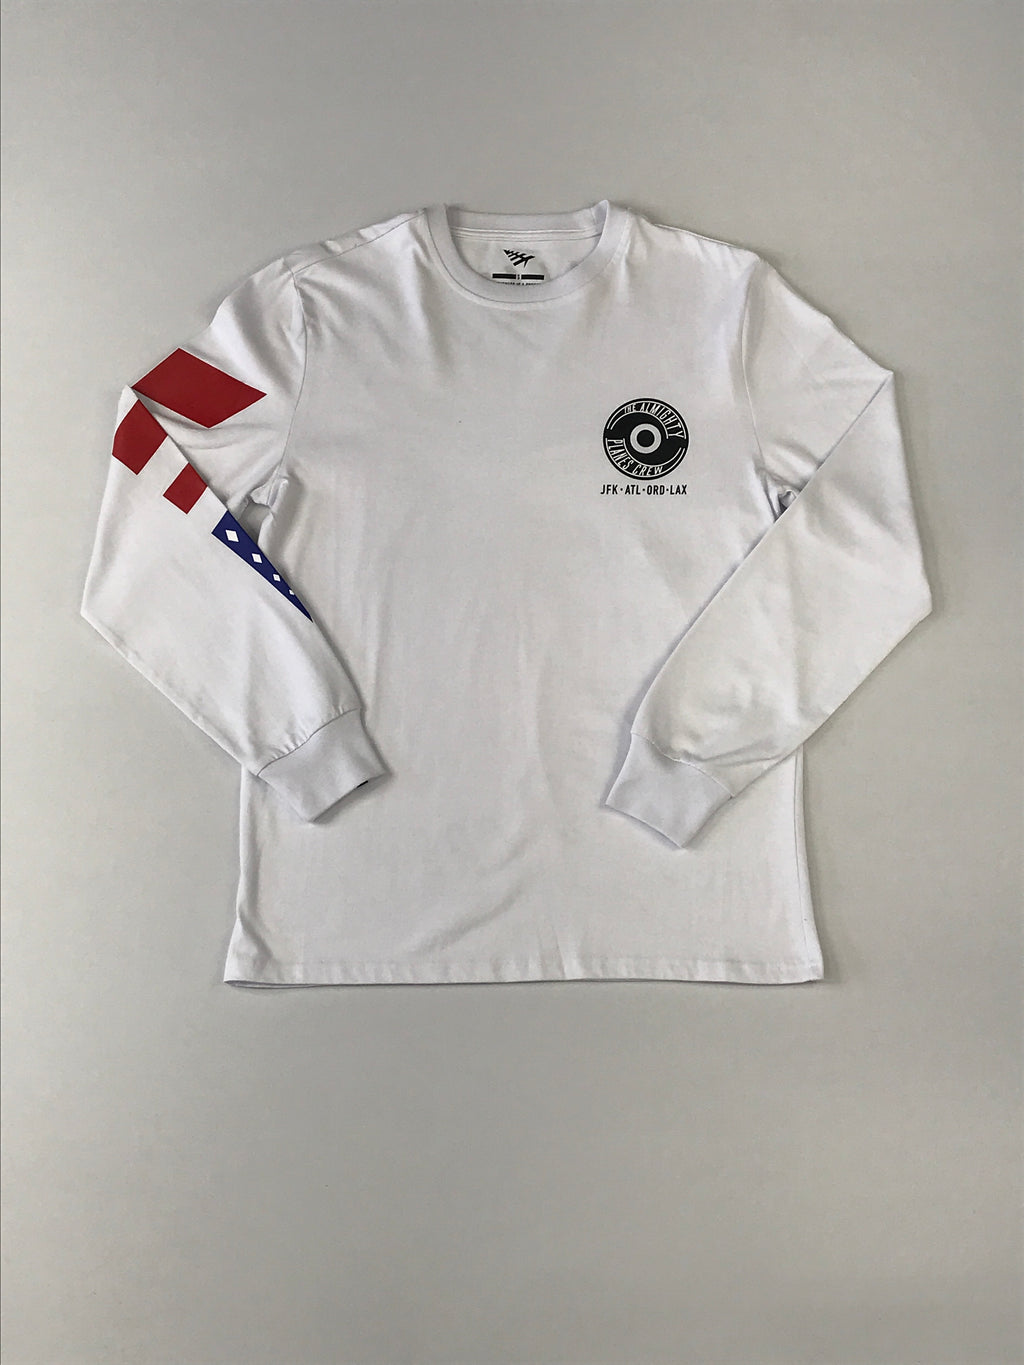 Planes Airport code long sleeve shirt in whit